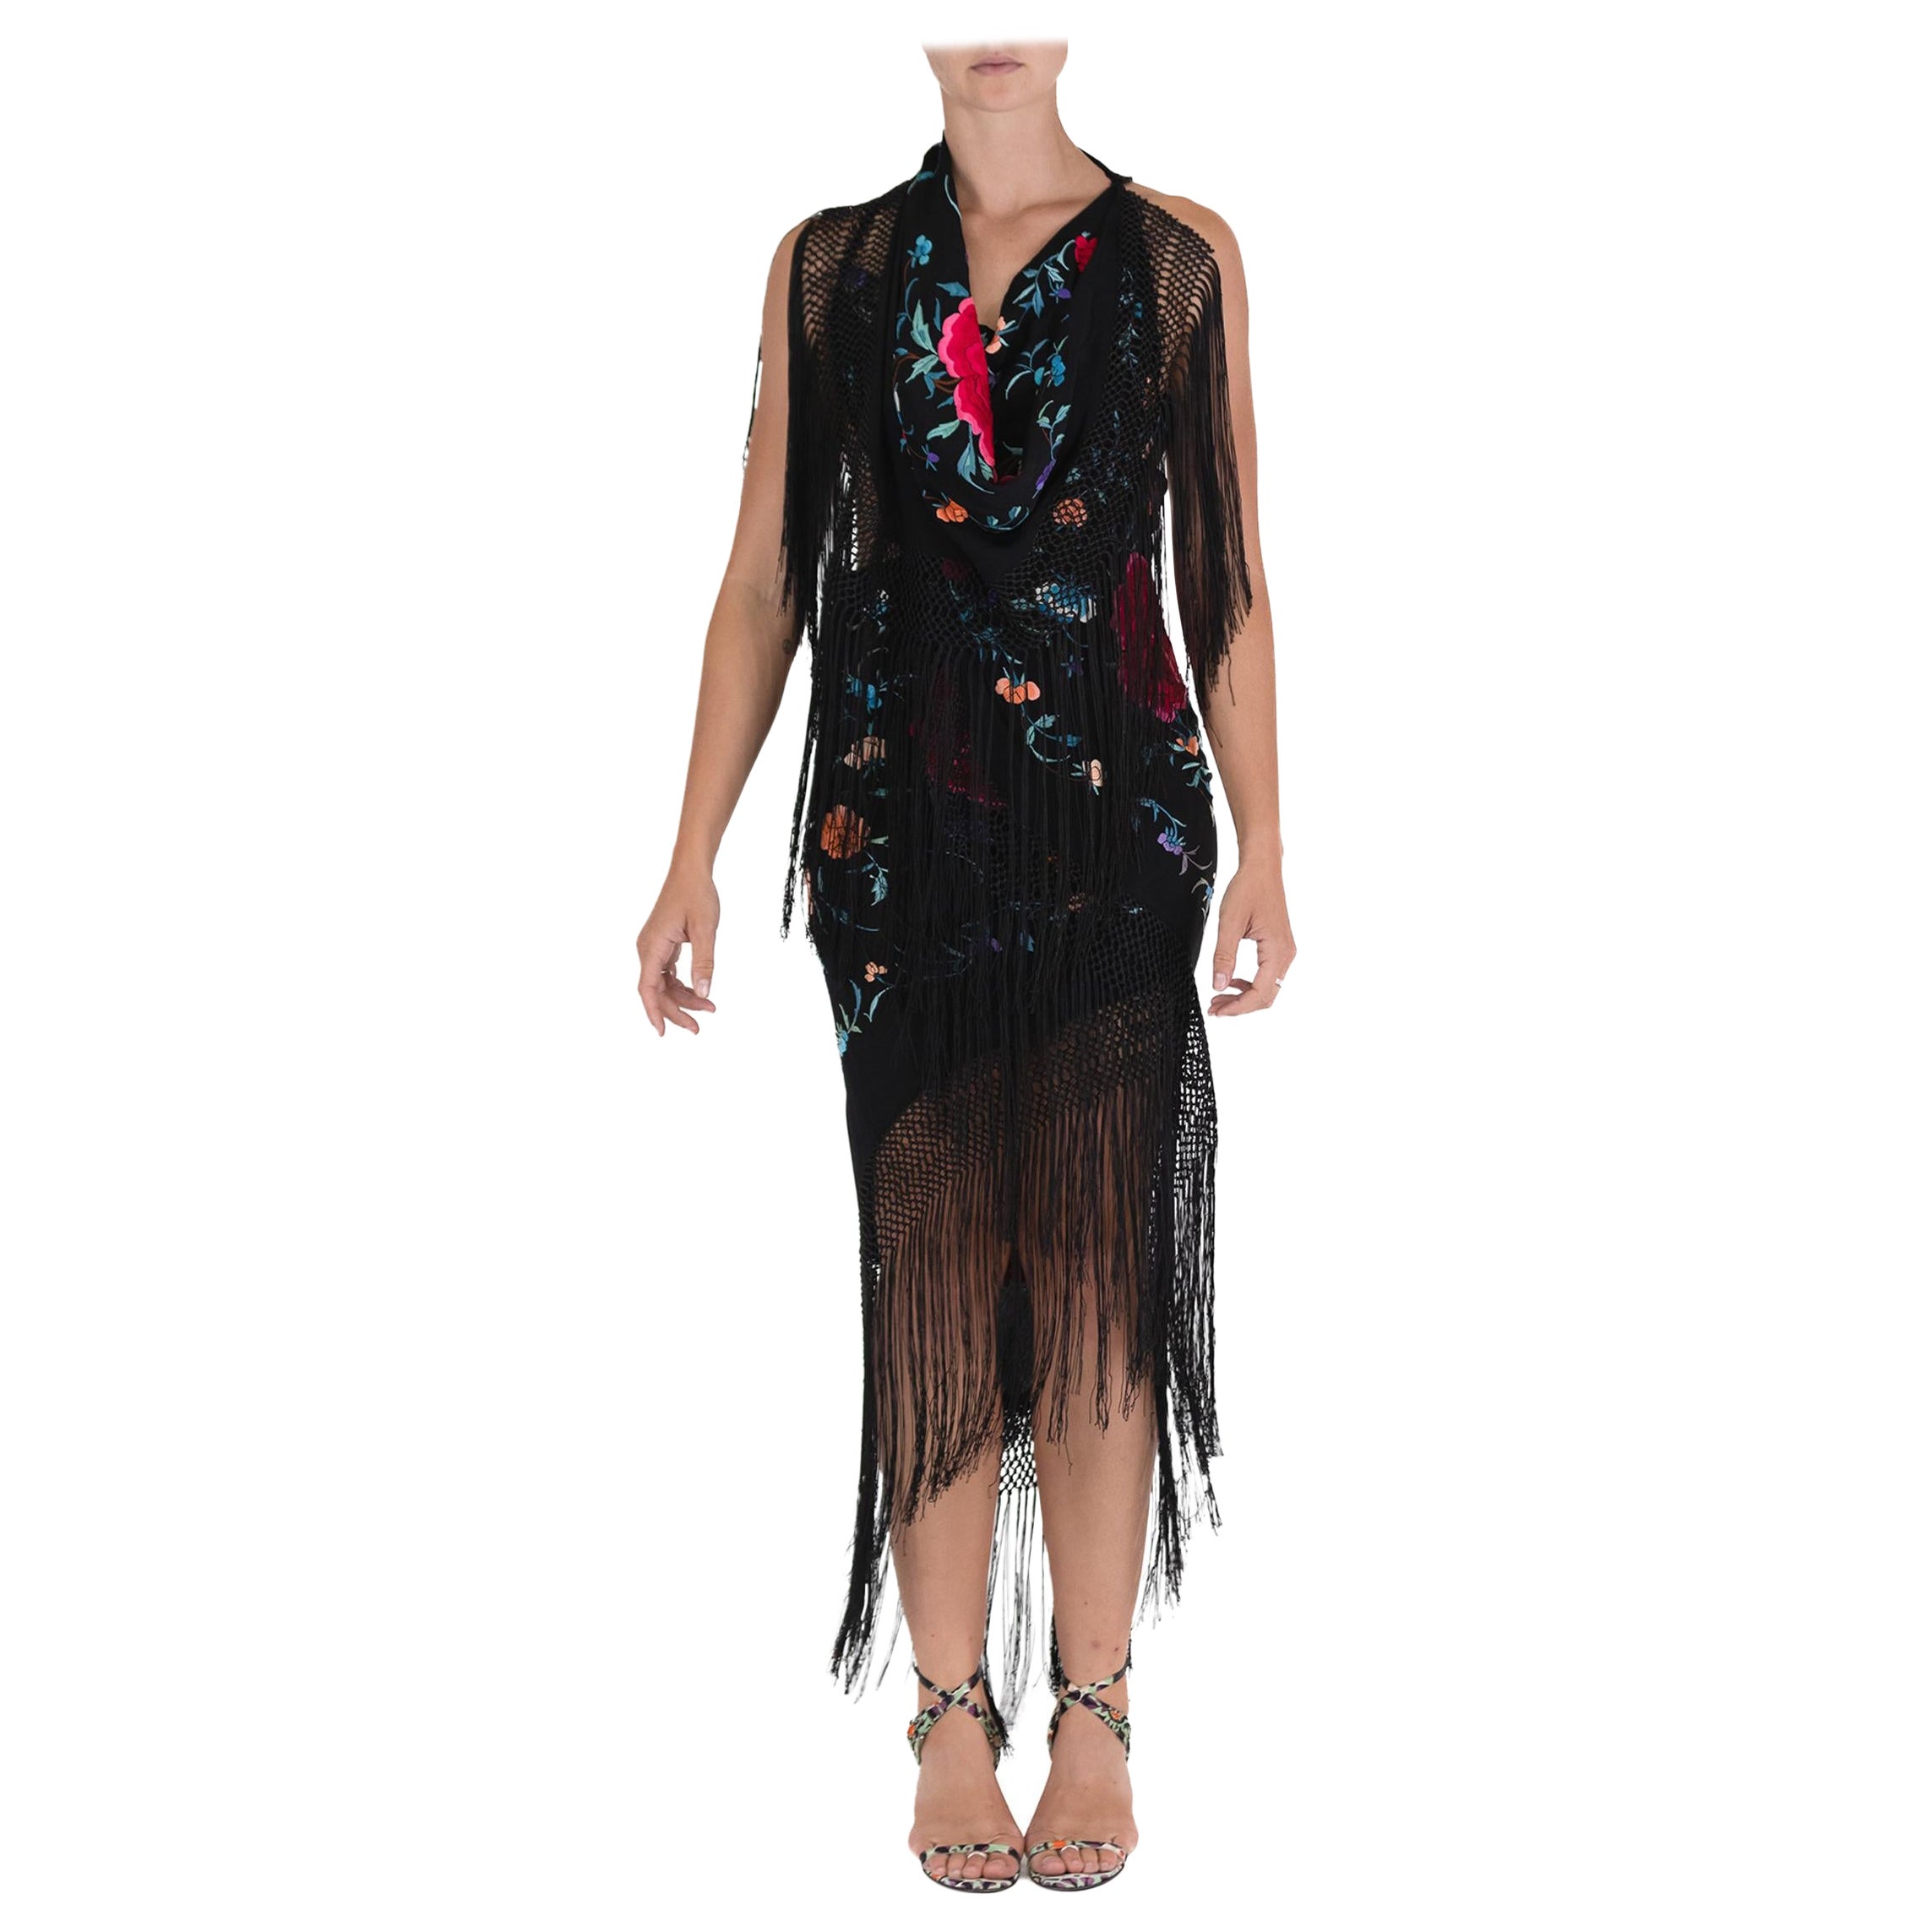 MORPHEW COLLECTION Black Cotton Maxi Dress With Neon Appliqué and ...